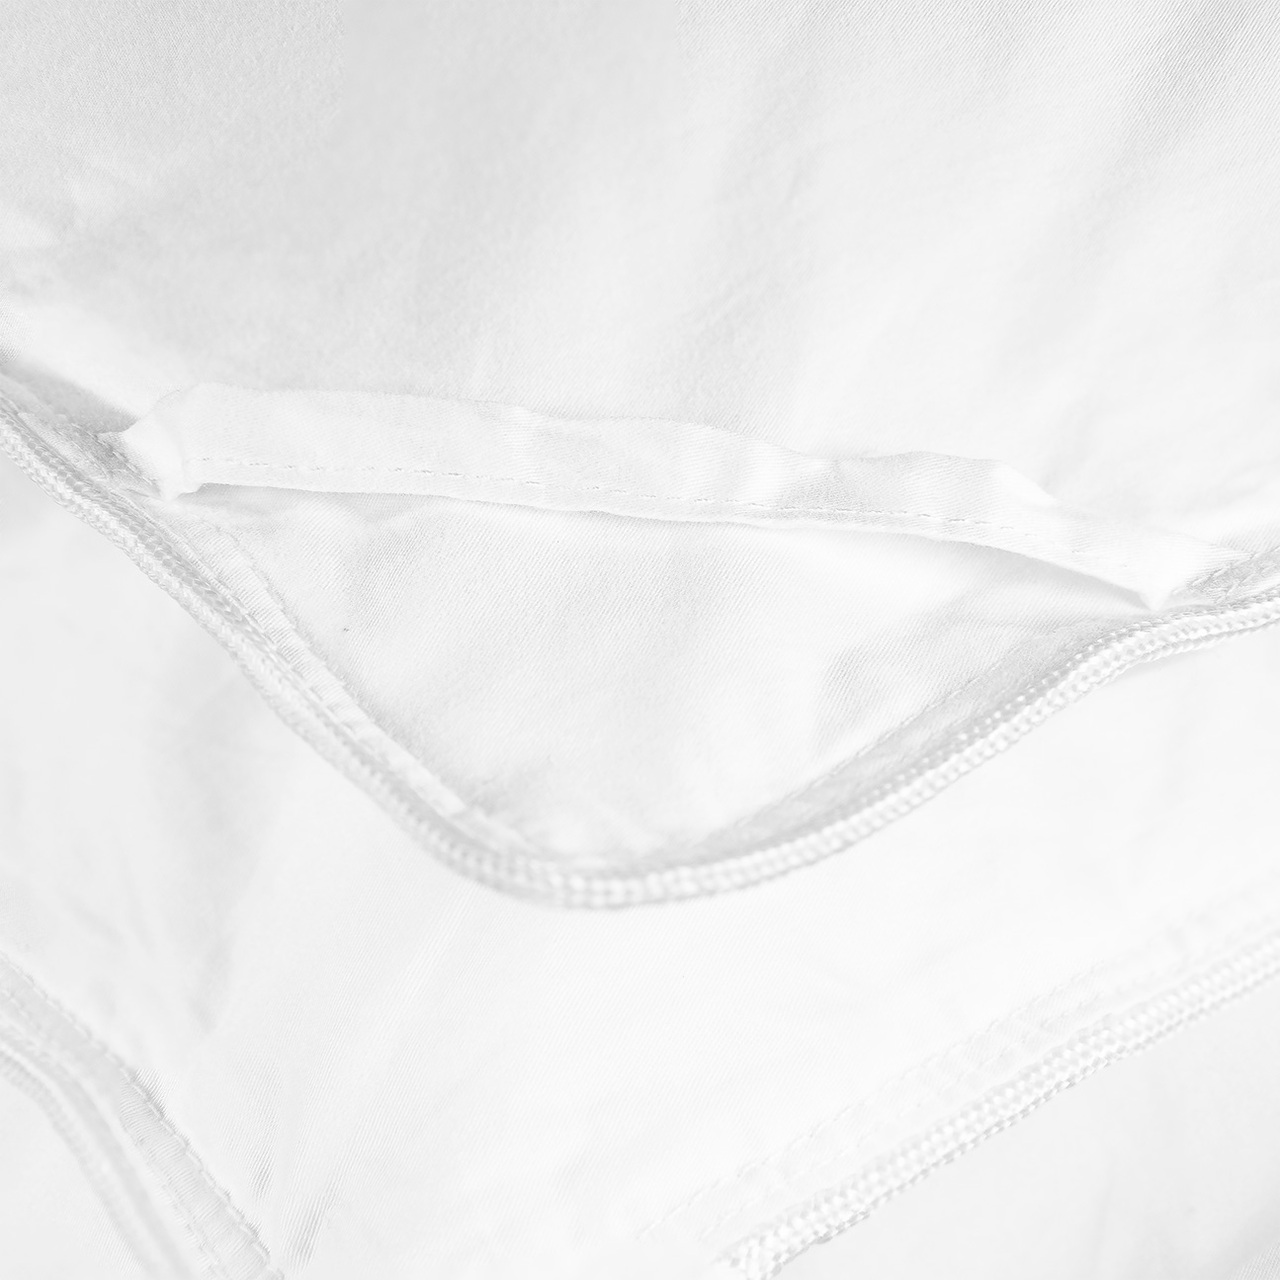 Down comforters are equipped with corner loops for attachment to duvet cover that will prevent down comforter from slipping inside the duvet cover. 